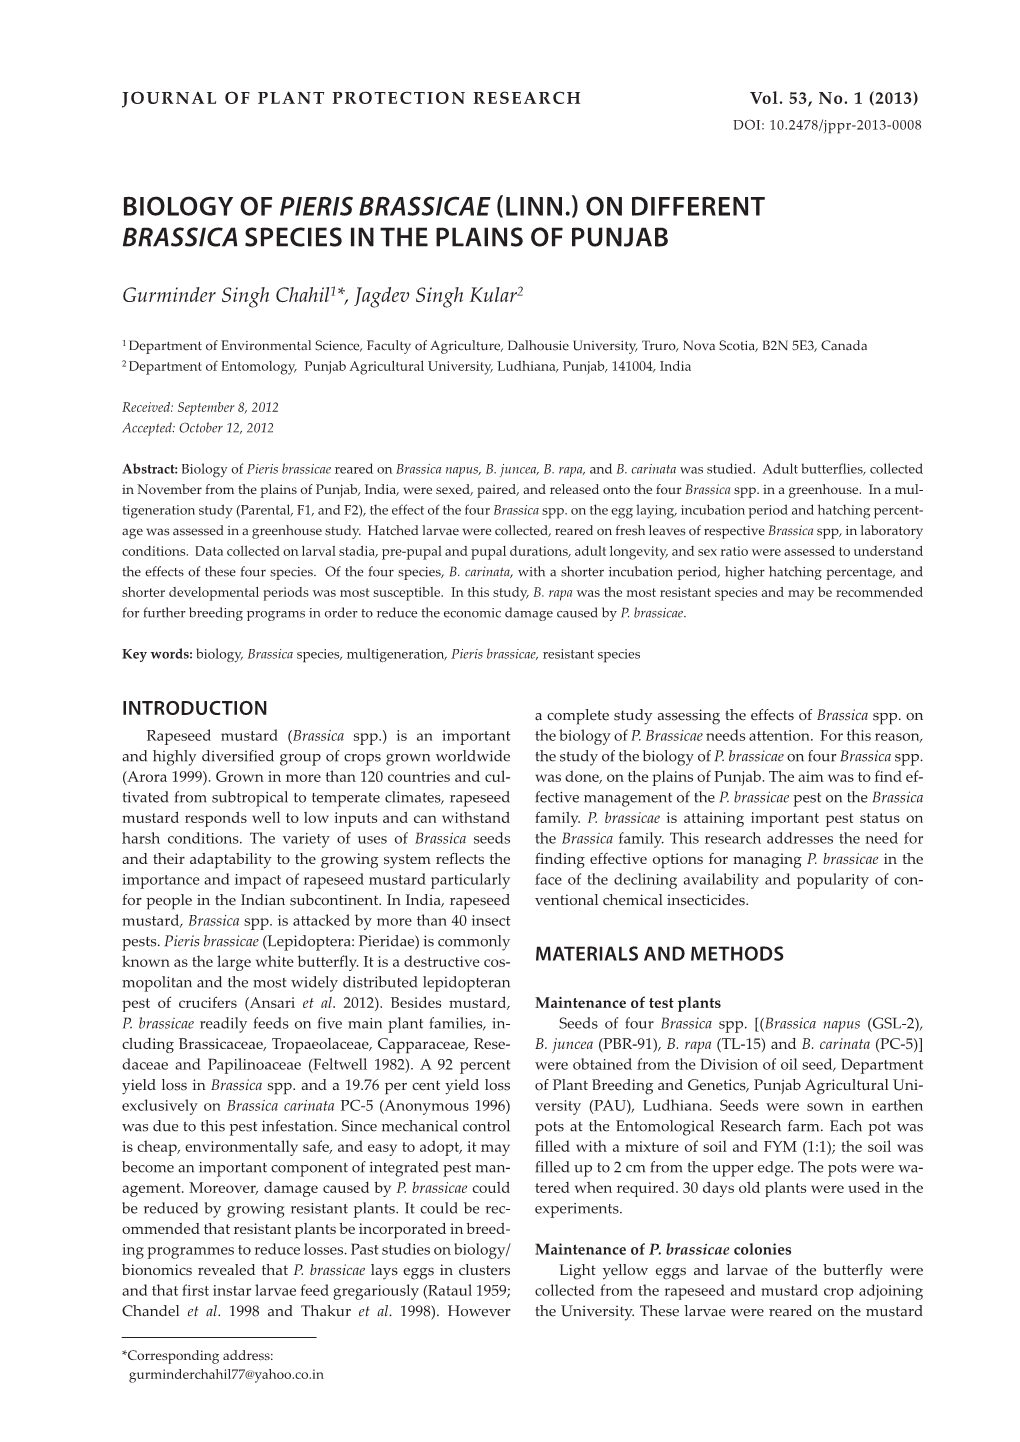 Biology of Pieris Brassicae (Linn.) on Different Brassica Species in the Plains of Punjab